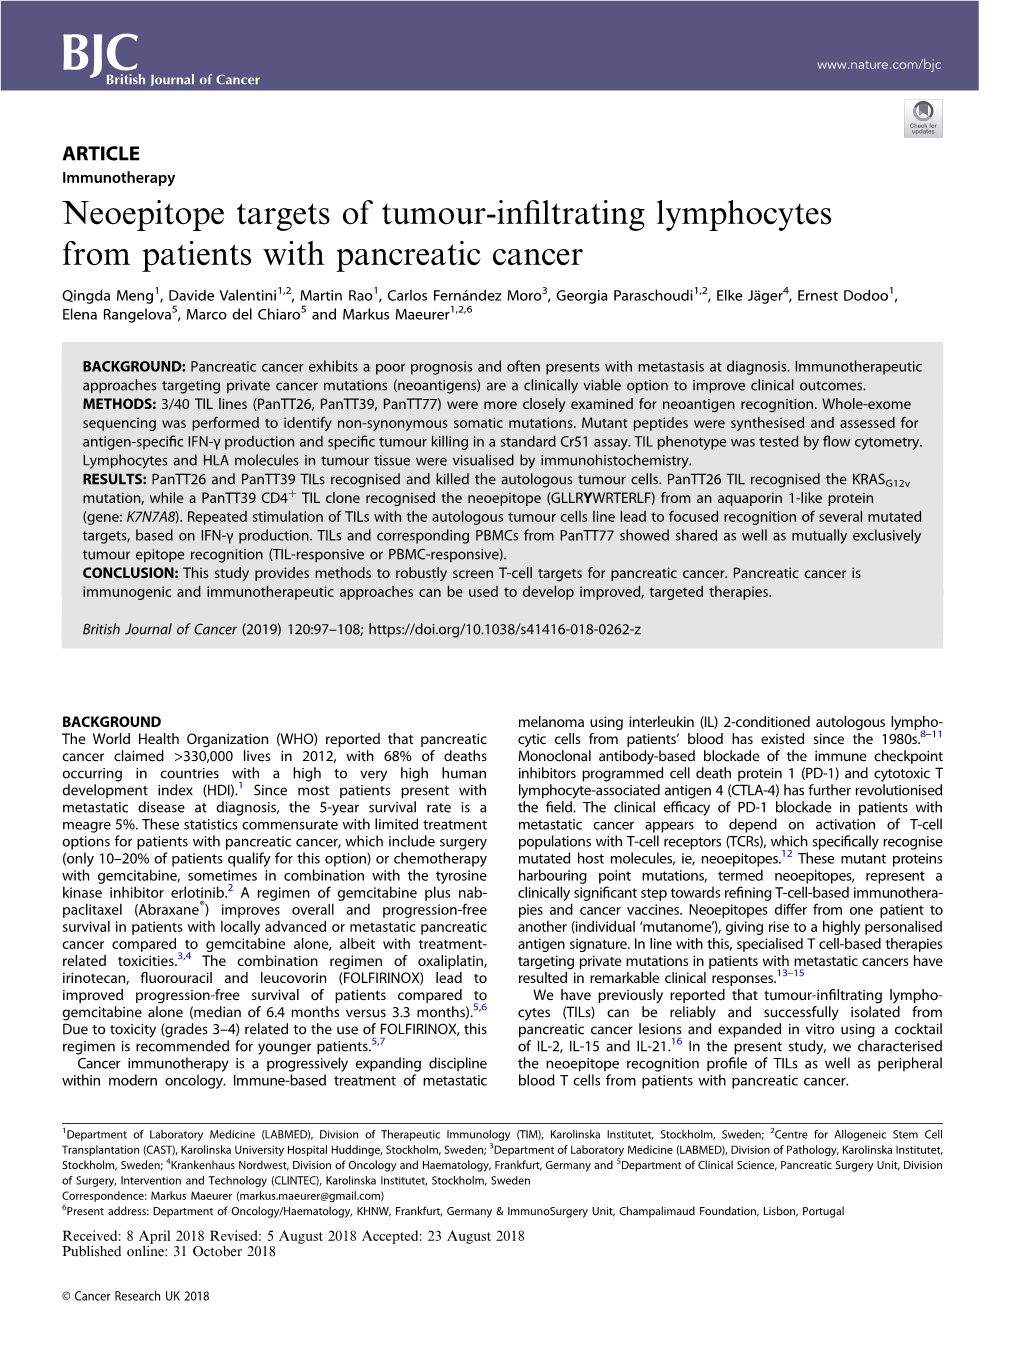 Neoepitope Targets of Tumour-Infiltrating Lymphocytes From